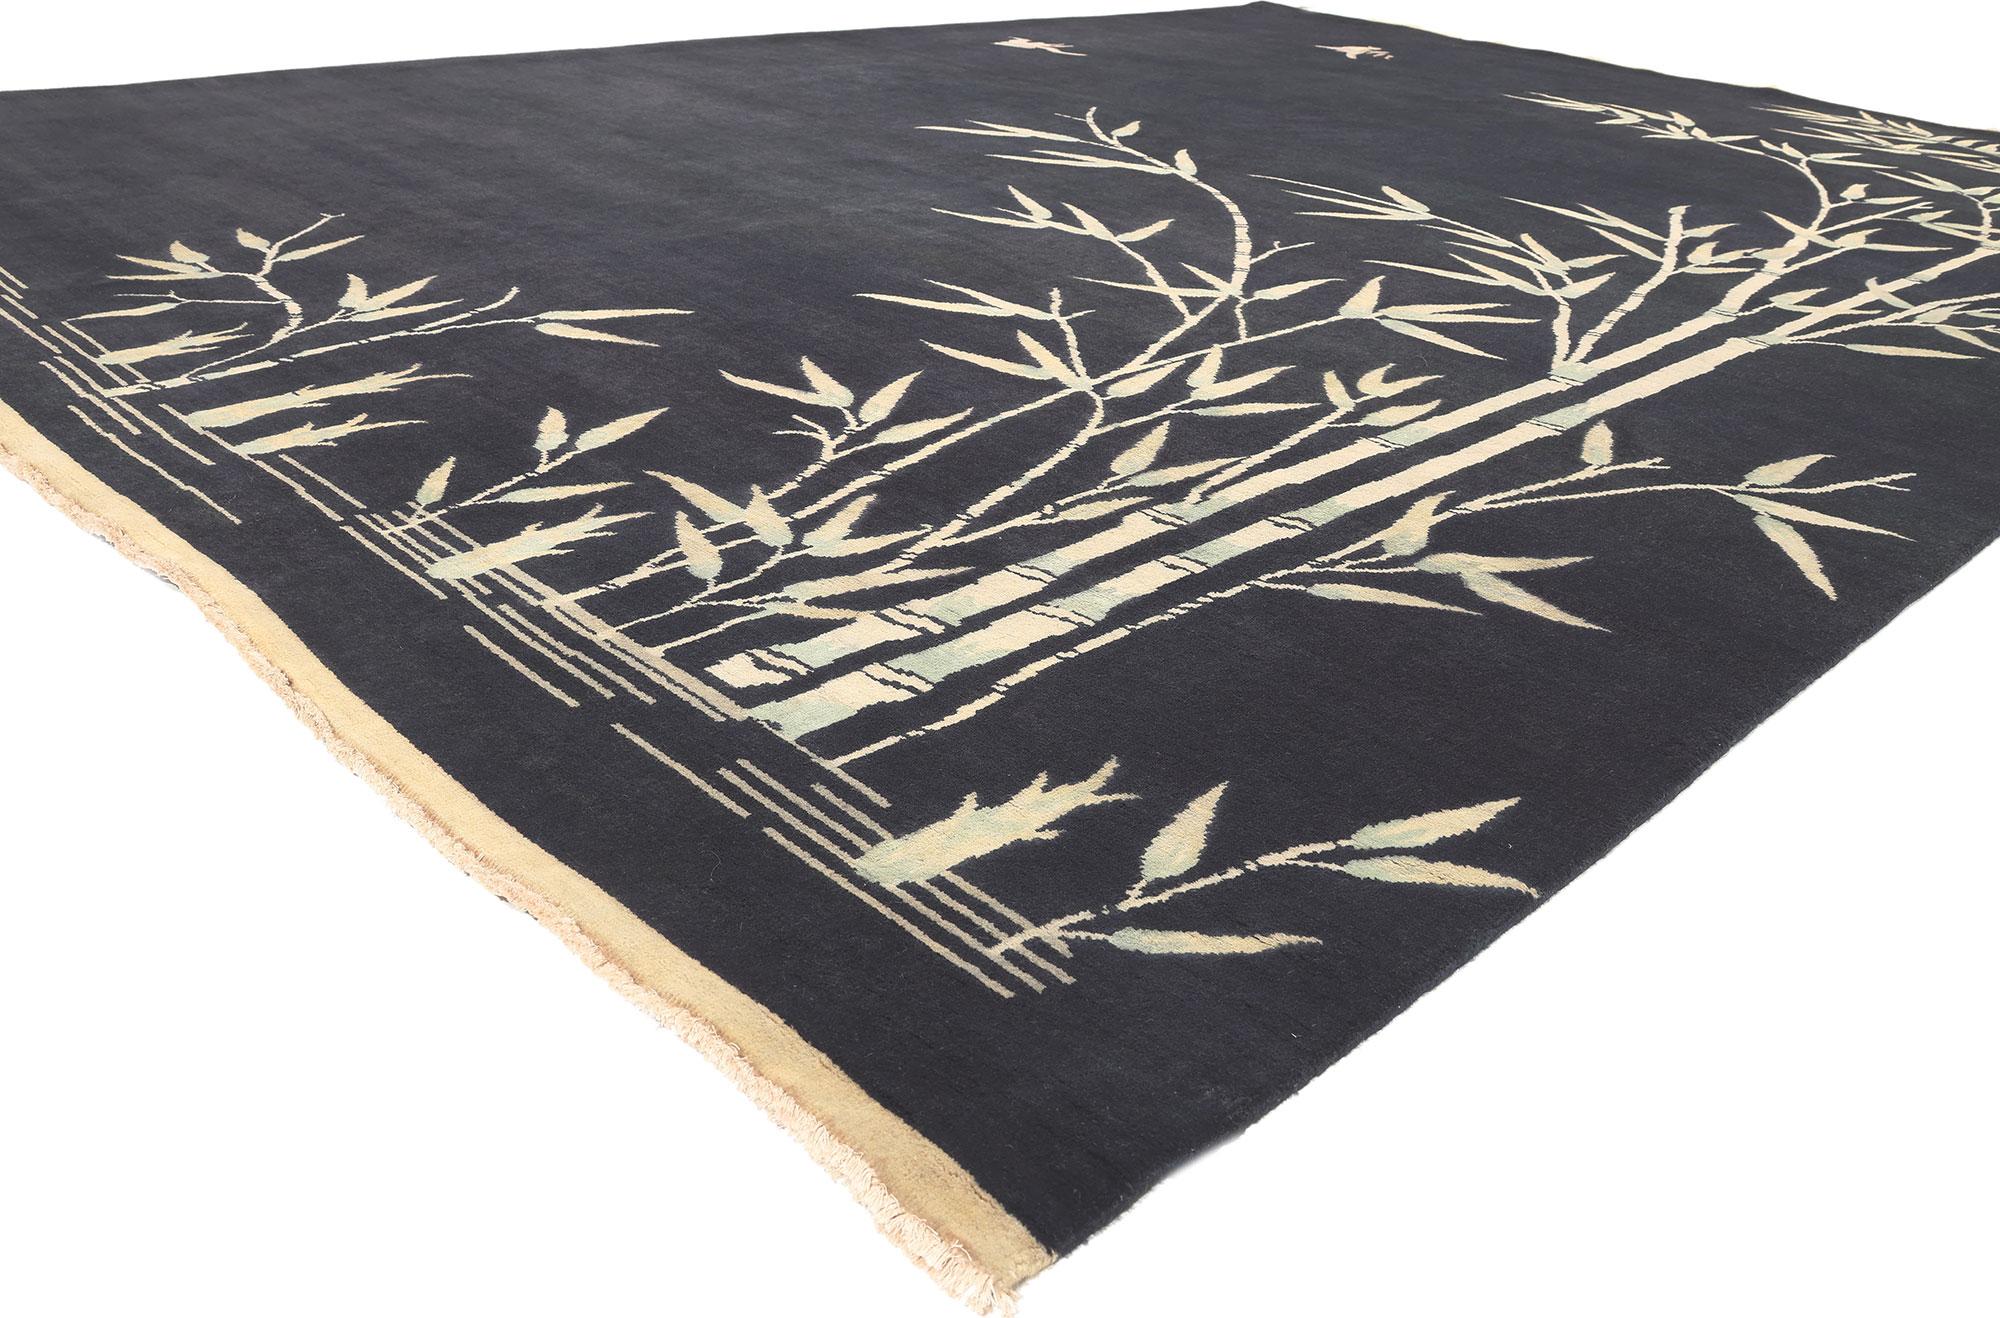 30970 Modern Chinese Art Deco Pictorial Rug, 10'00 x 13'09.
Showcasing a unique bamboo design, incredible detail and texture, this hand knotted wool contemporary Chinese Art Deco style rug is a captivating vision of woven beauty. The landscape